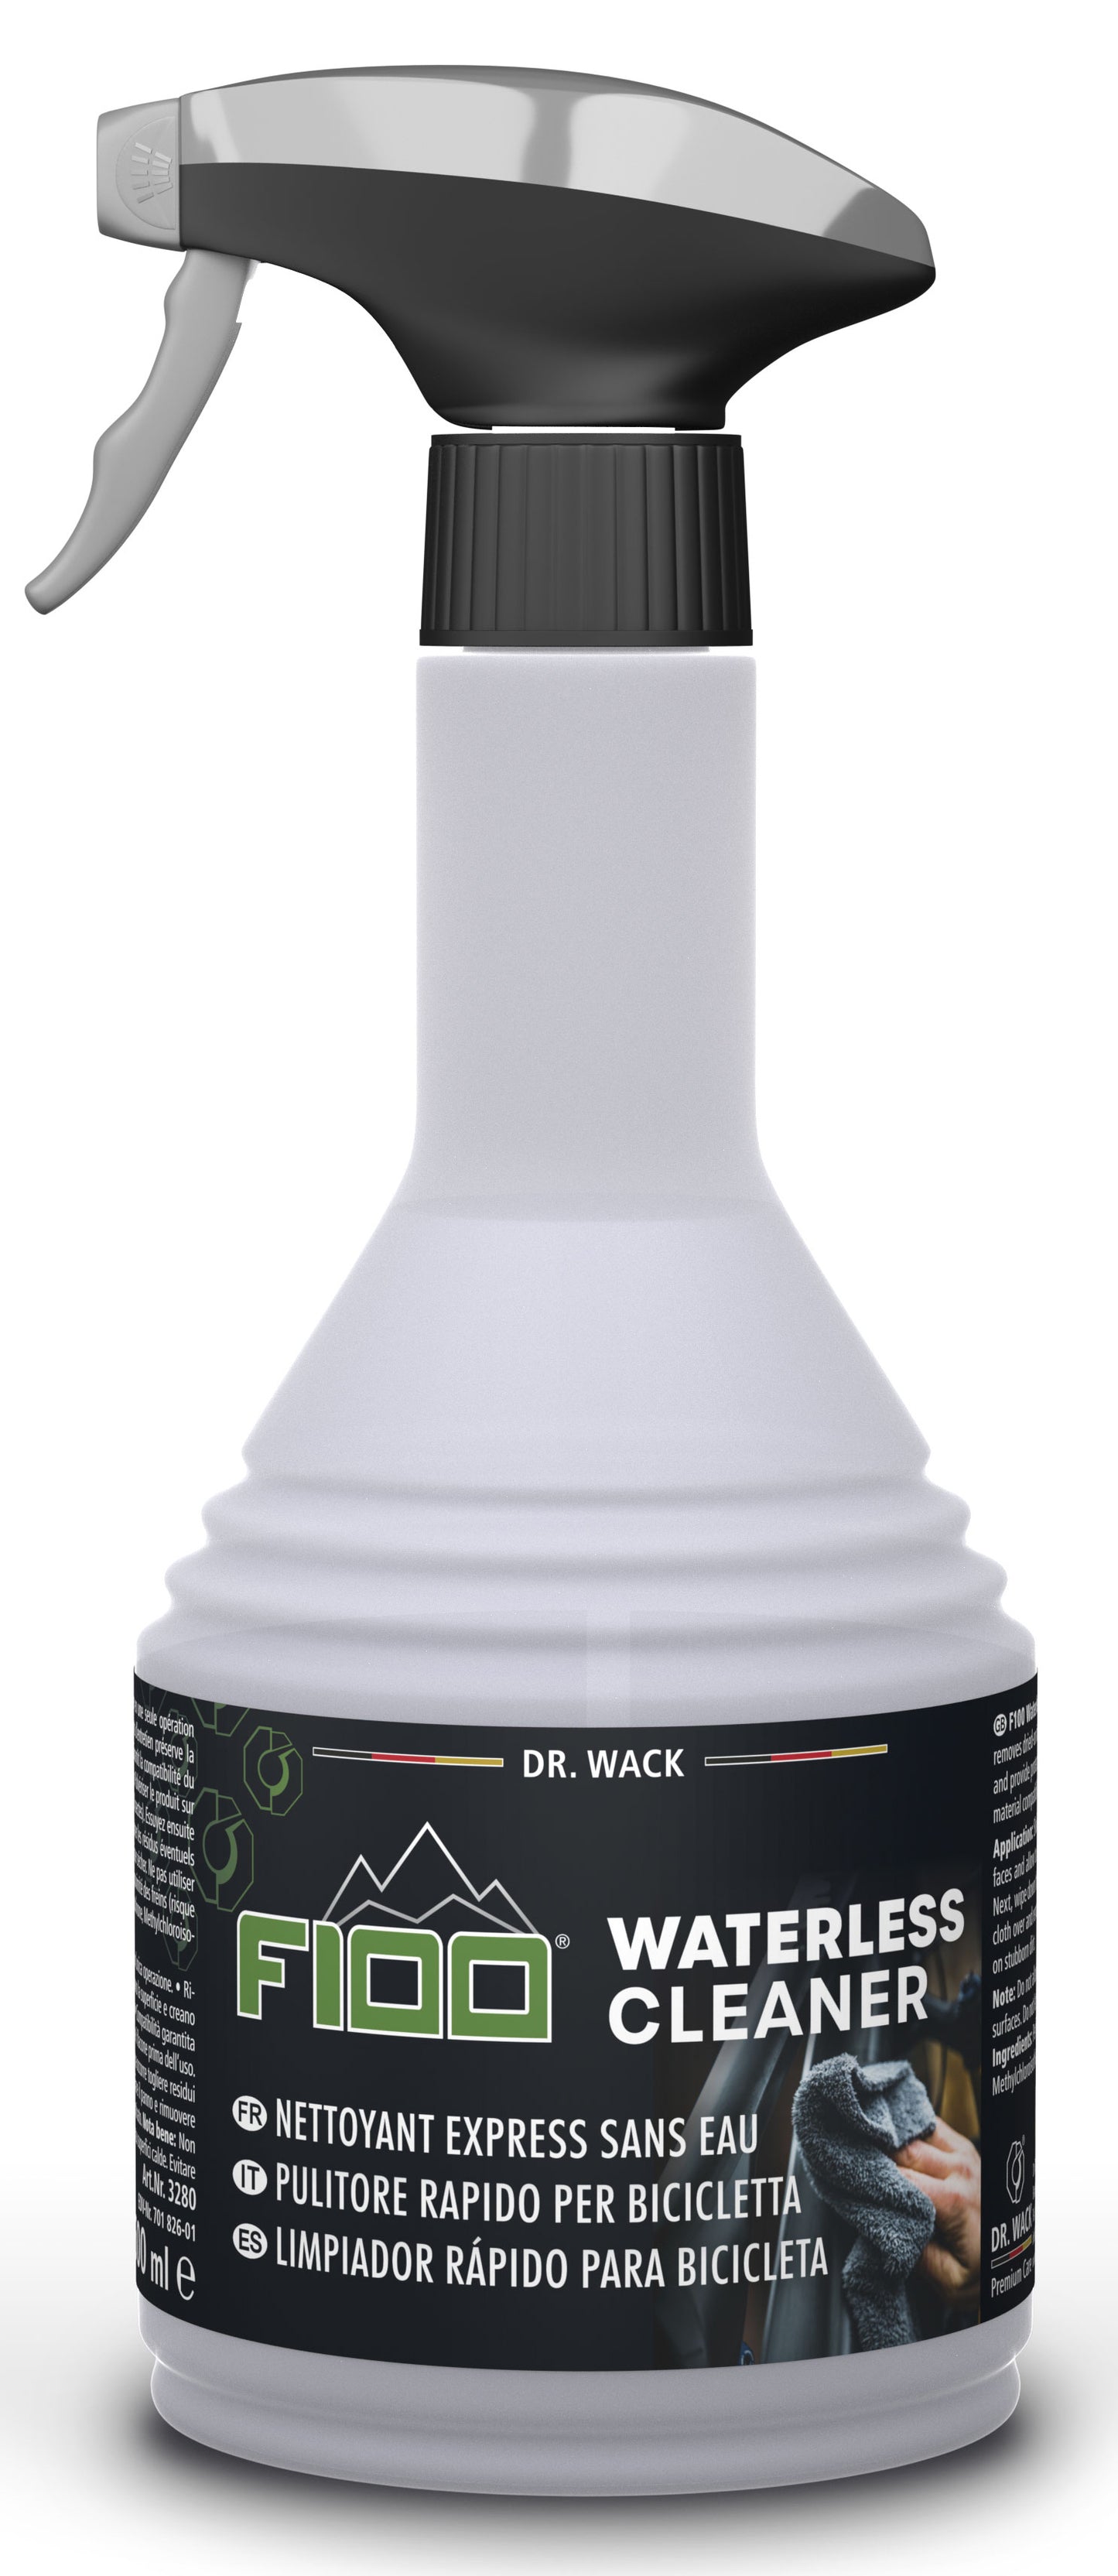 Drwack Waterless Cleaner Dr. Wack F100 Express Care